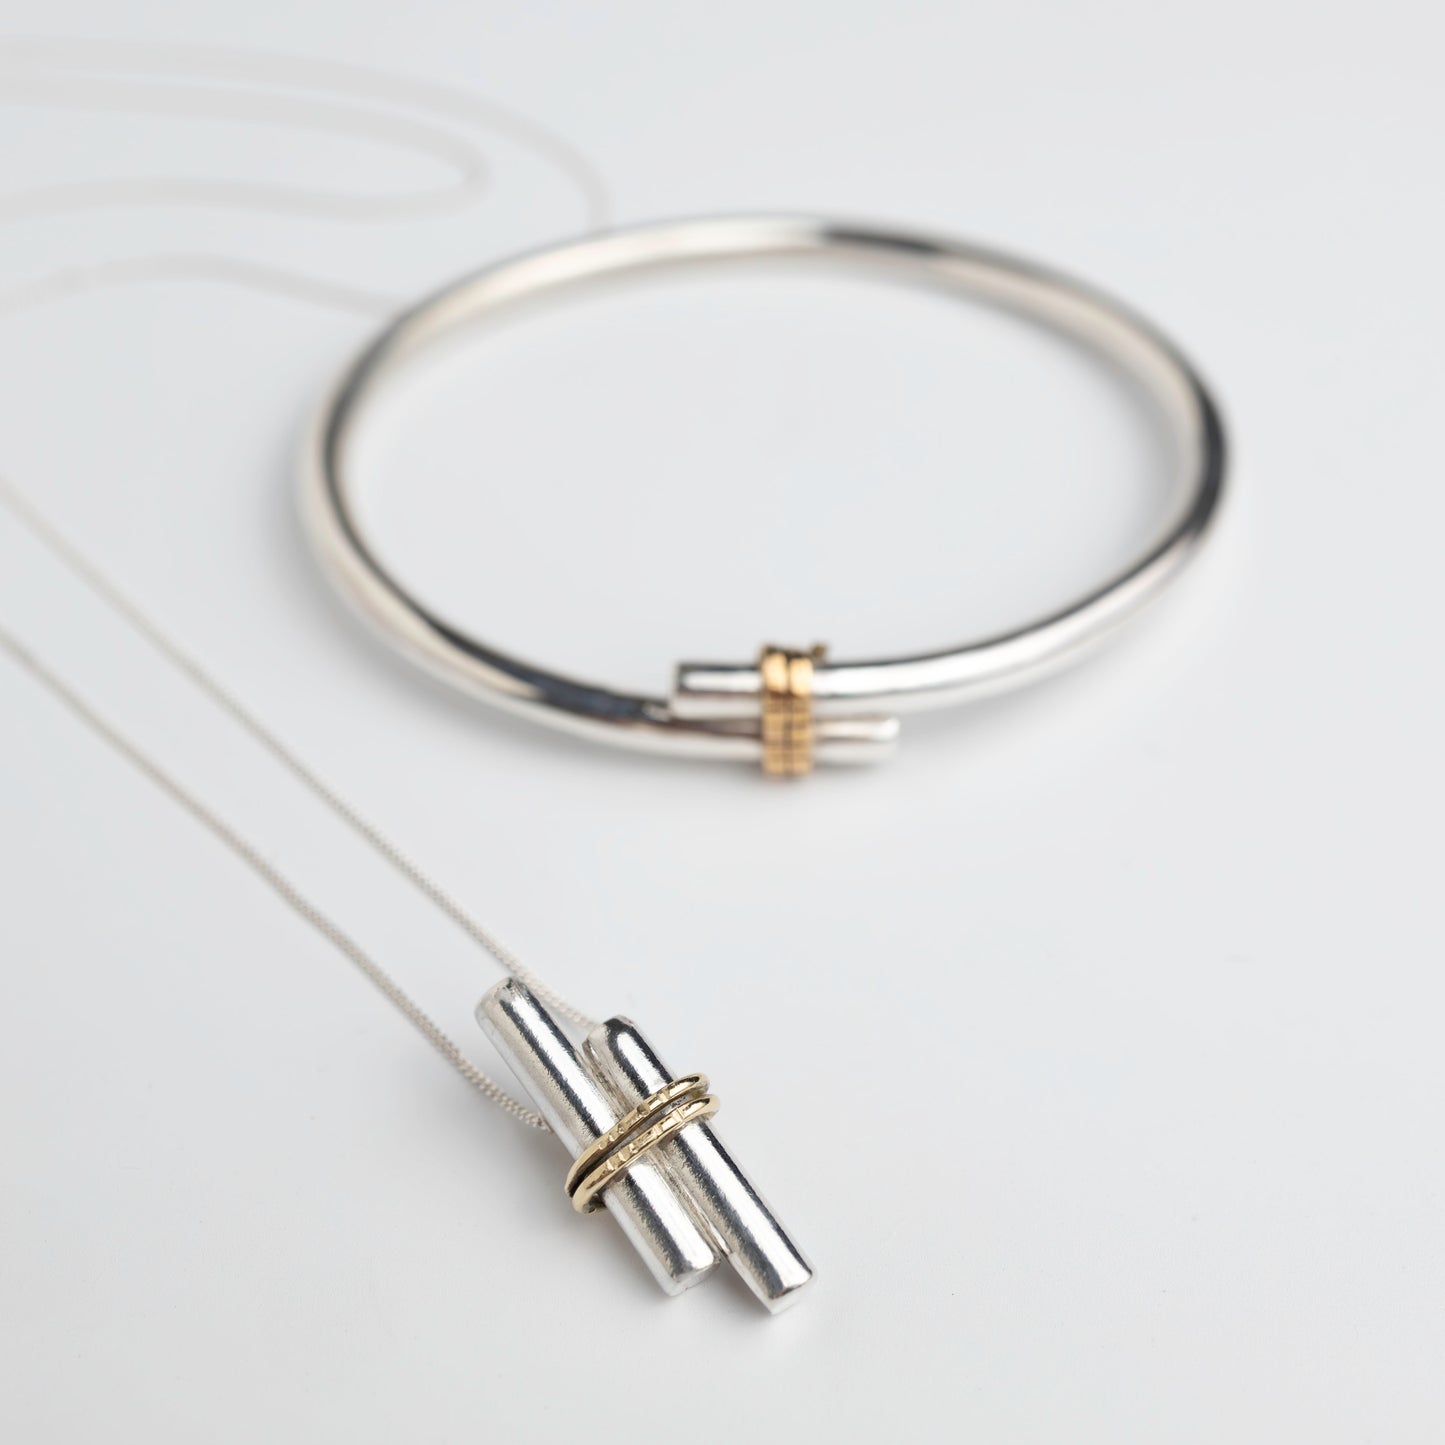 sterling silver solid bangle with gold embellished piece on the front shown here with a matching pendant with magnetic clasp